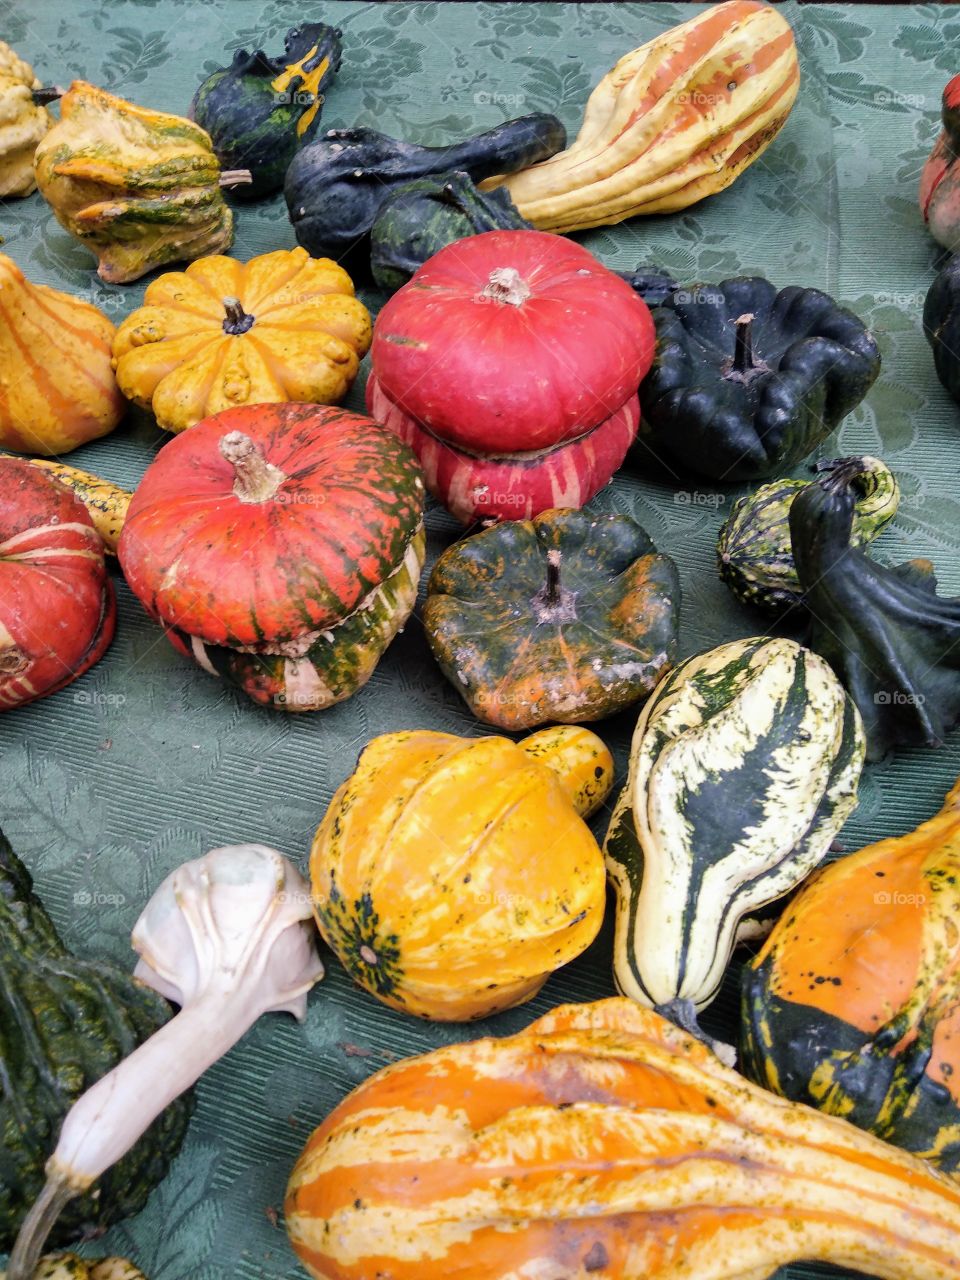 Coloured pumpkins photographed in a street market exhibition